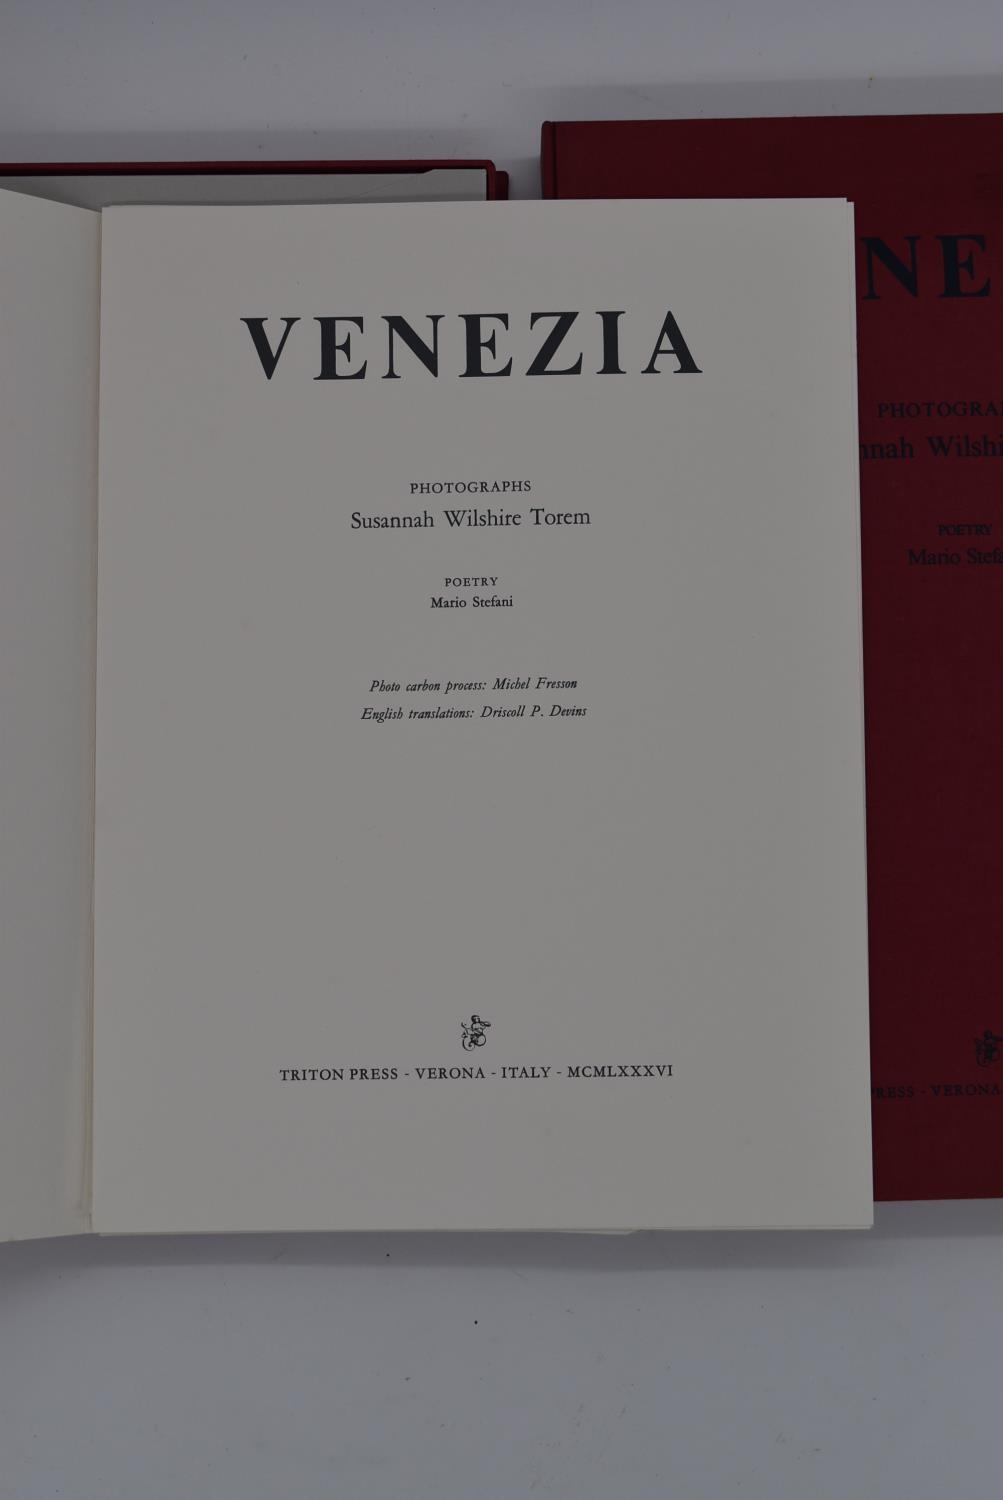 Susannah Wilshire Torem, Venezia, a photograph book together with poems by Mario Stefani, - Image 2 of 5